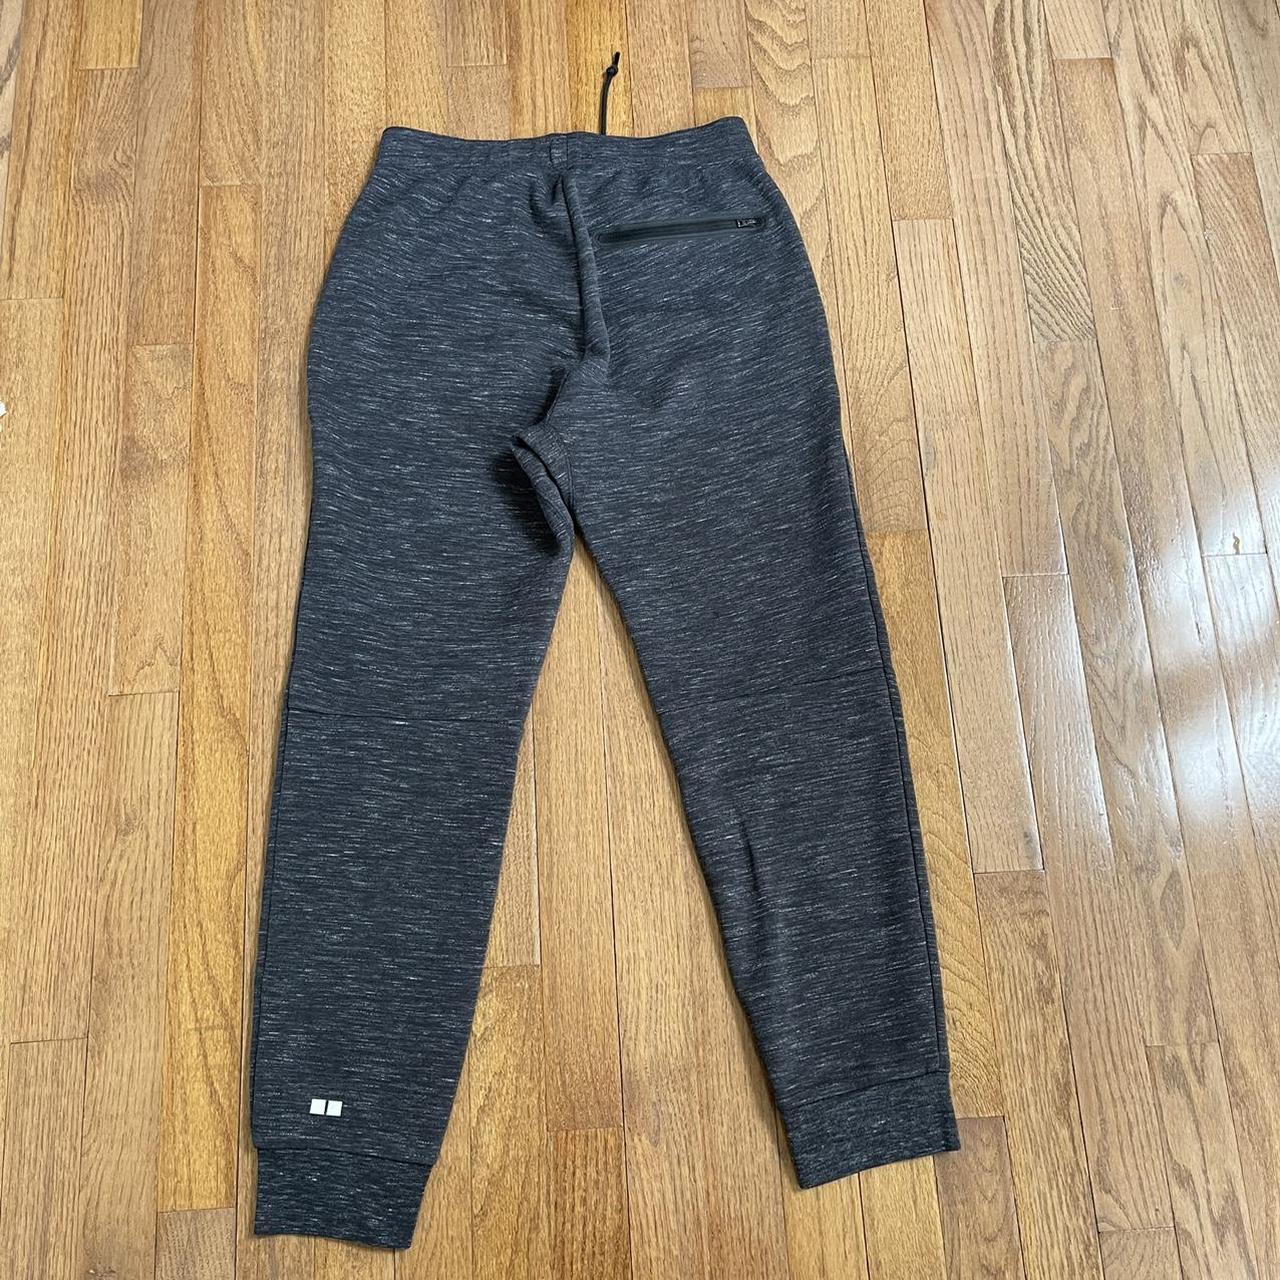 UNIQLO Men's Grey and White Joggers-tracksuits | Depop